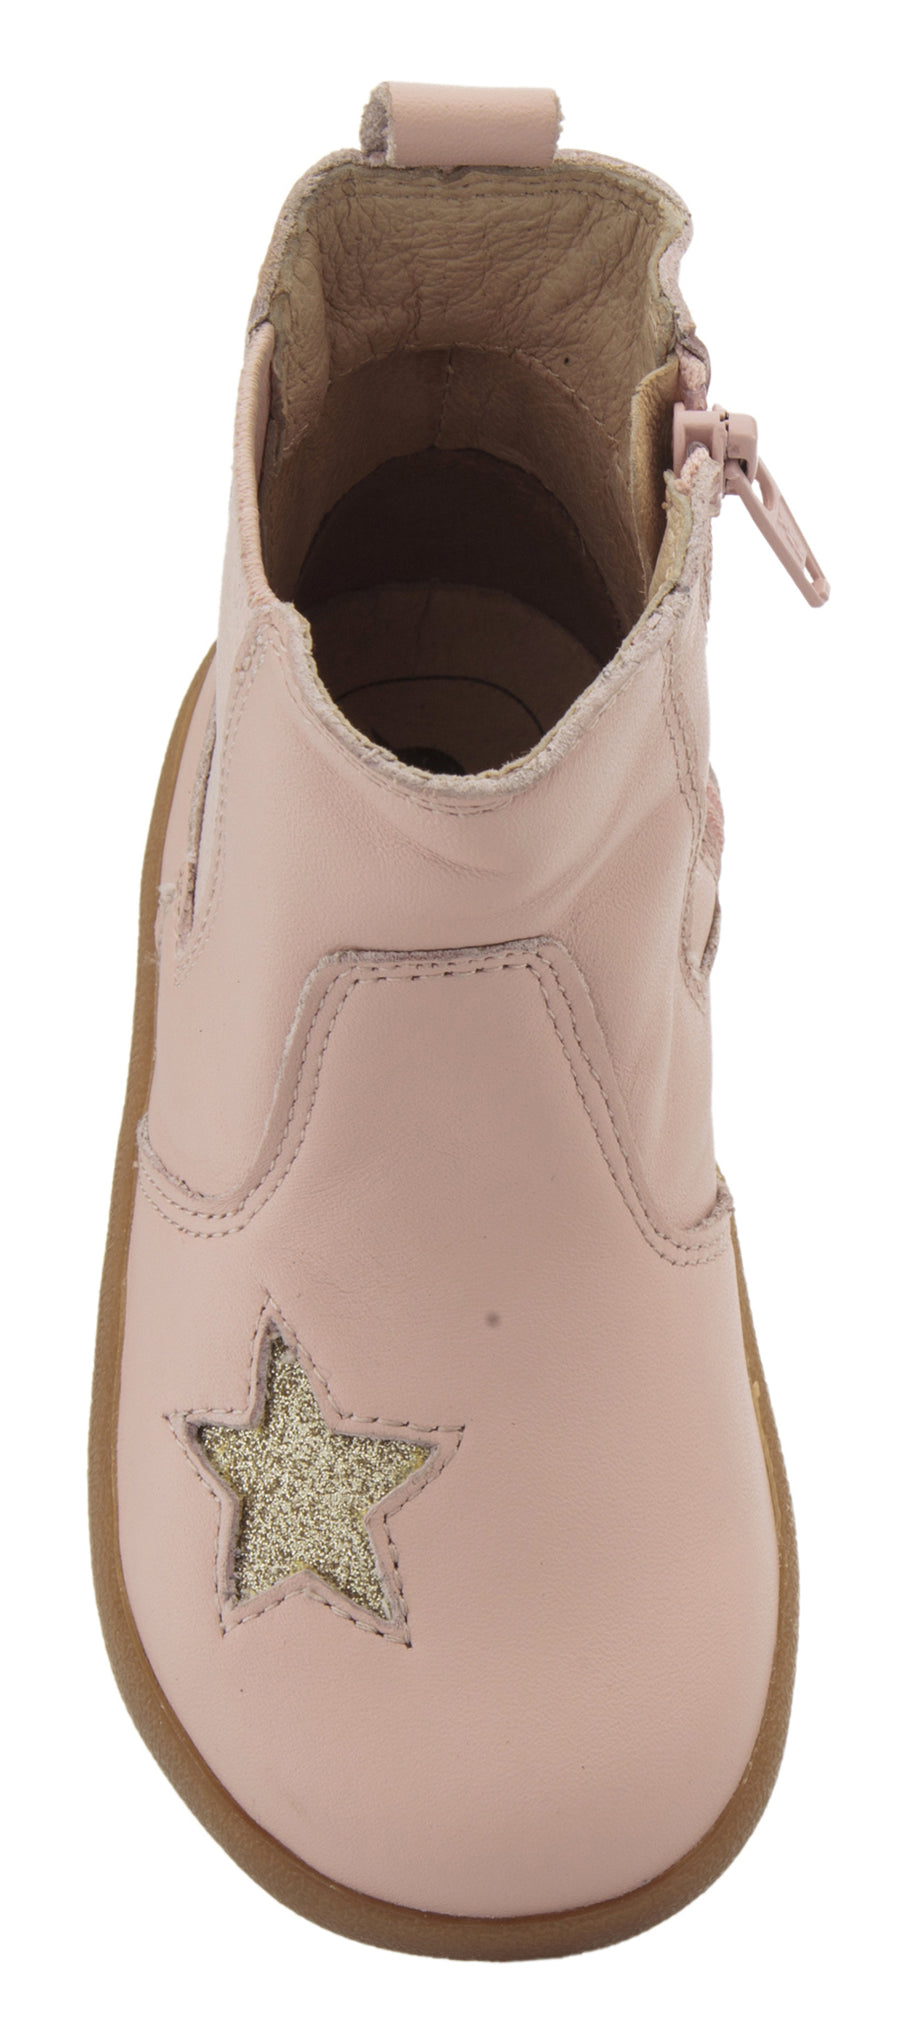 Old Soles Girl's 5060 Local Star Leather Slip On High Top Boot Sneaker - Powder Pink/Glam Gold